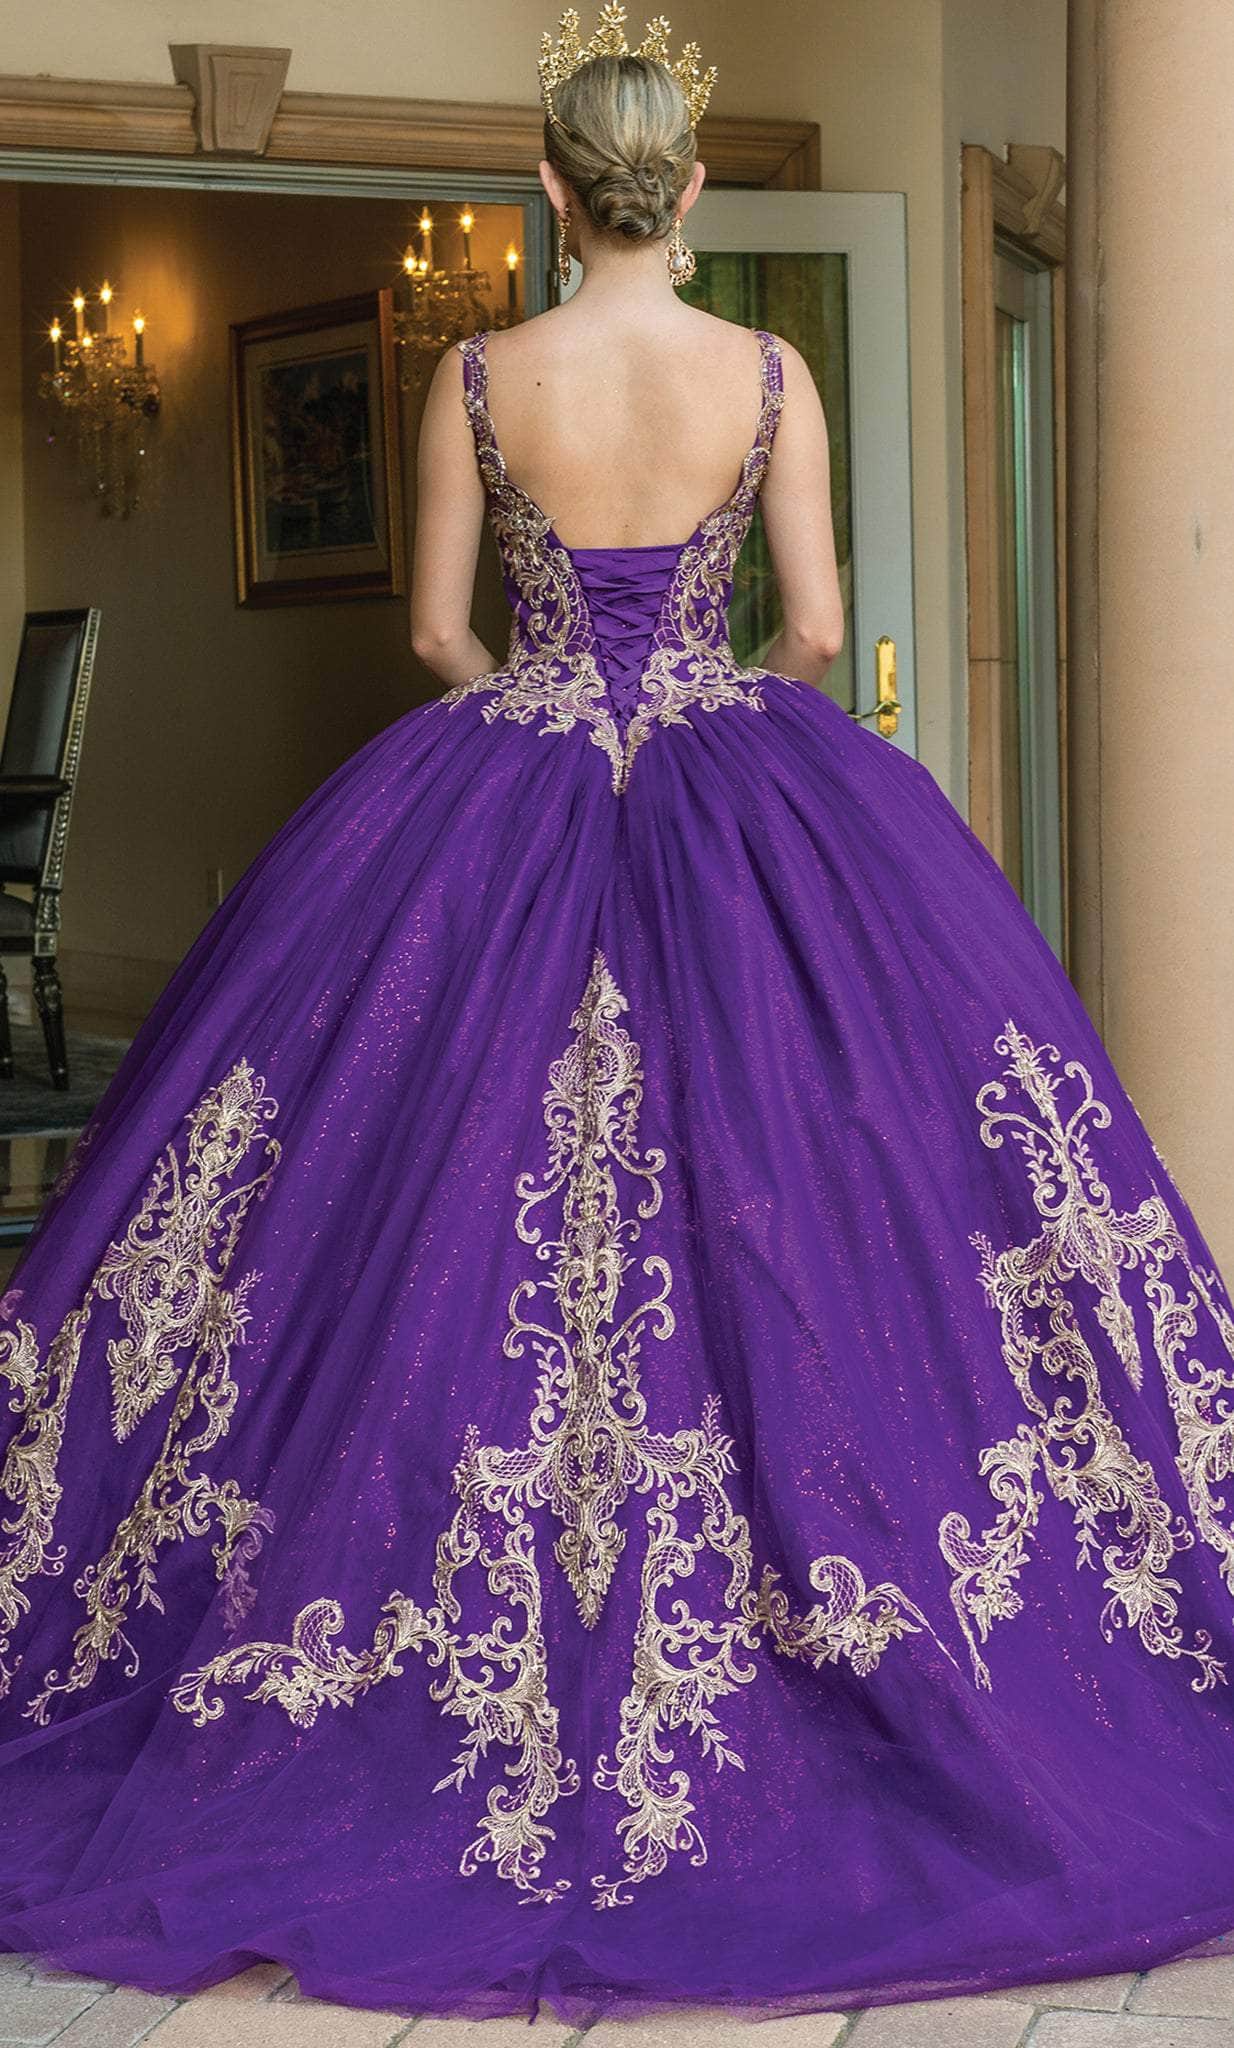 Dancing Queen 1635 - V-Neck Lace Appliqued Ballgown Ball Gowns